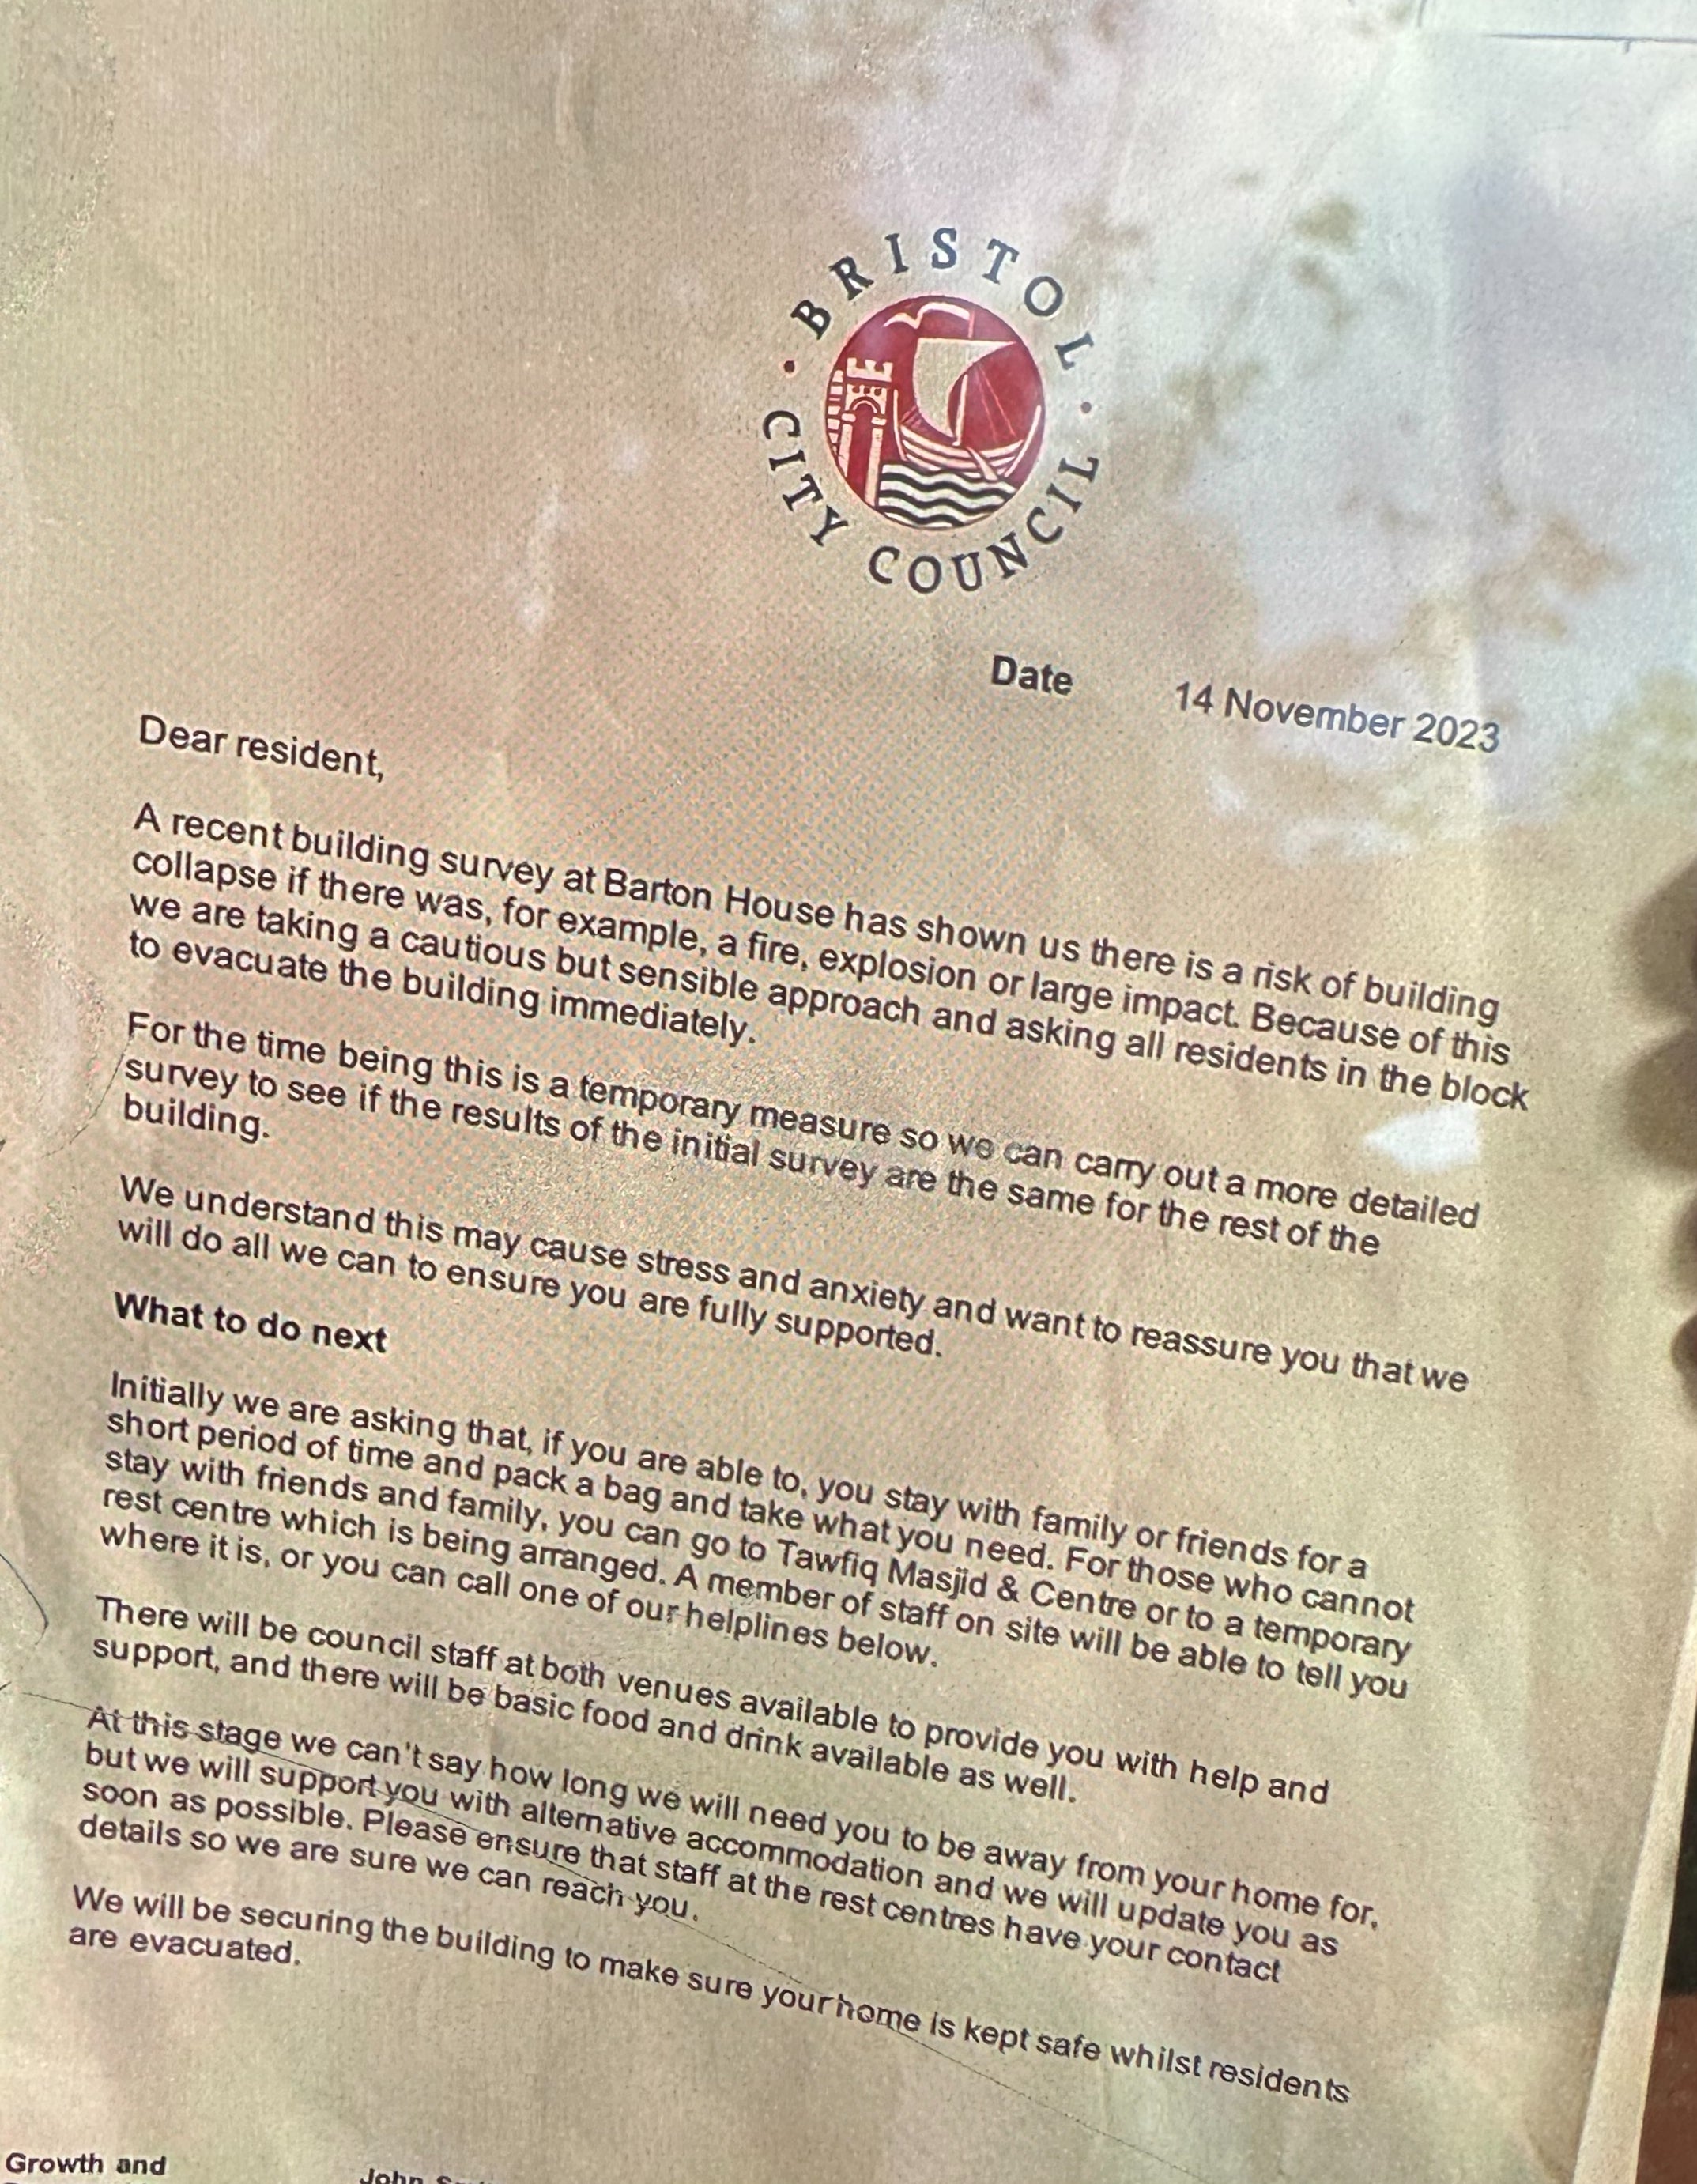 The letter sent to residents in Barton House, asking them to leave